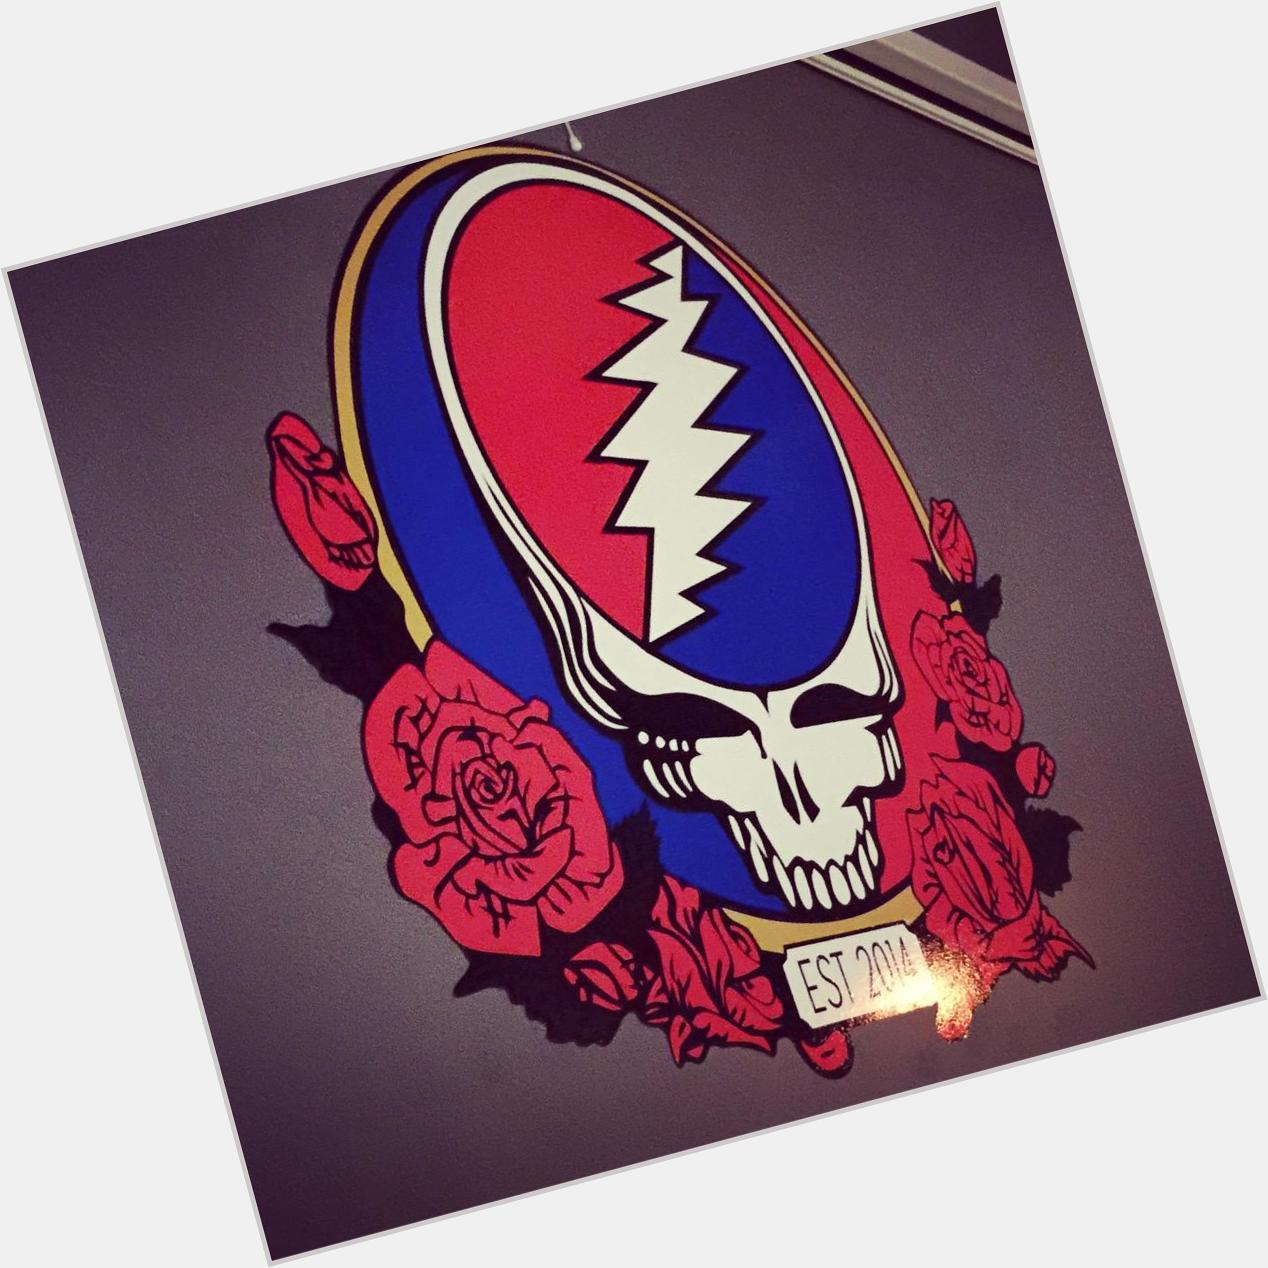 Waited a month to unveil this to the world...a \"Steal Your Face\" made just for my bar. Happy Birthday Jerry Garcia  